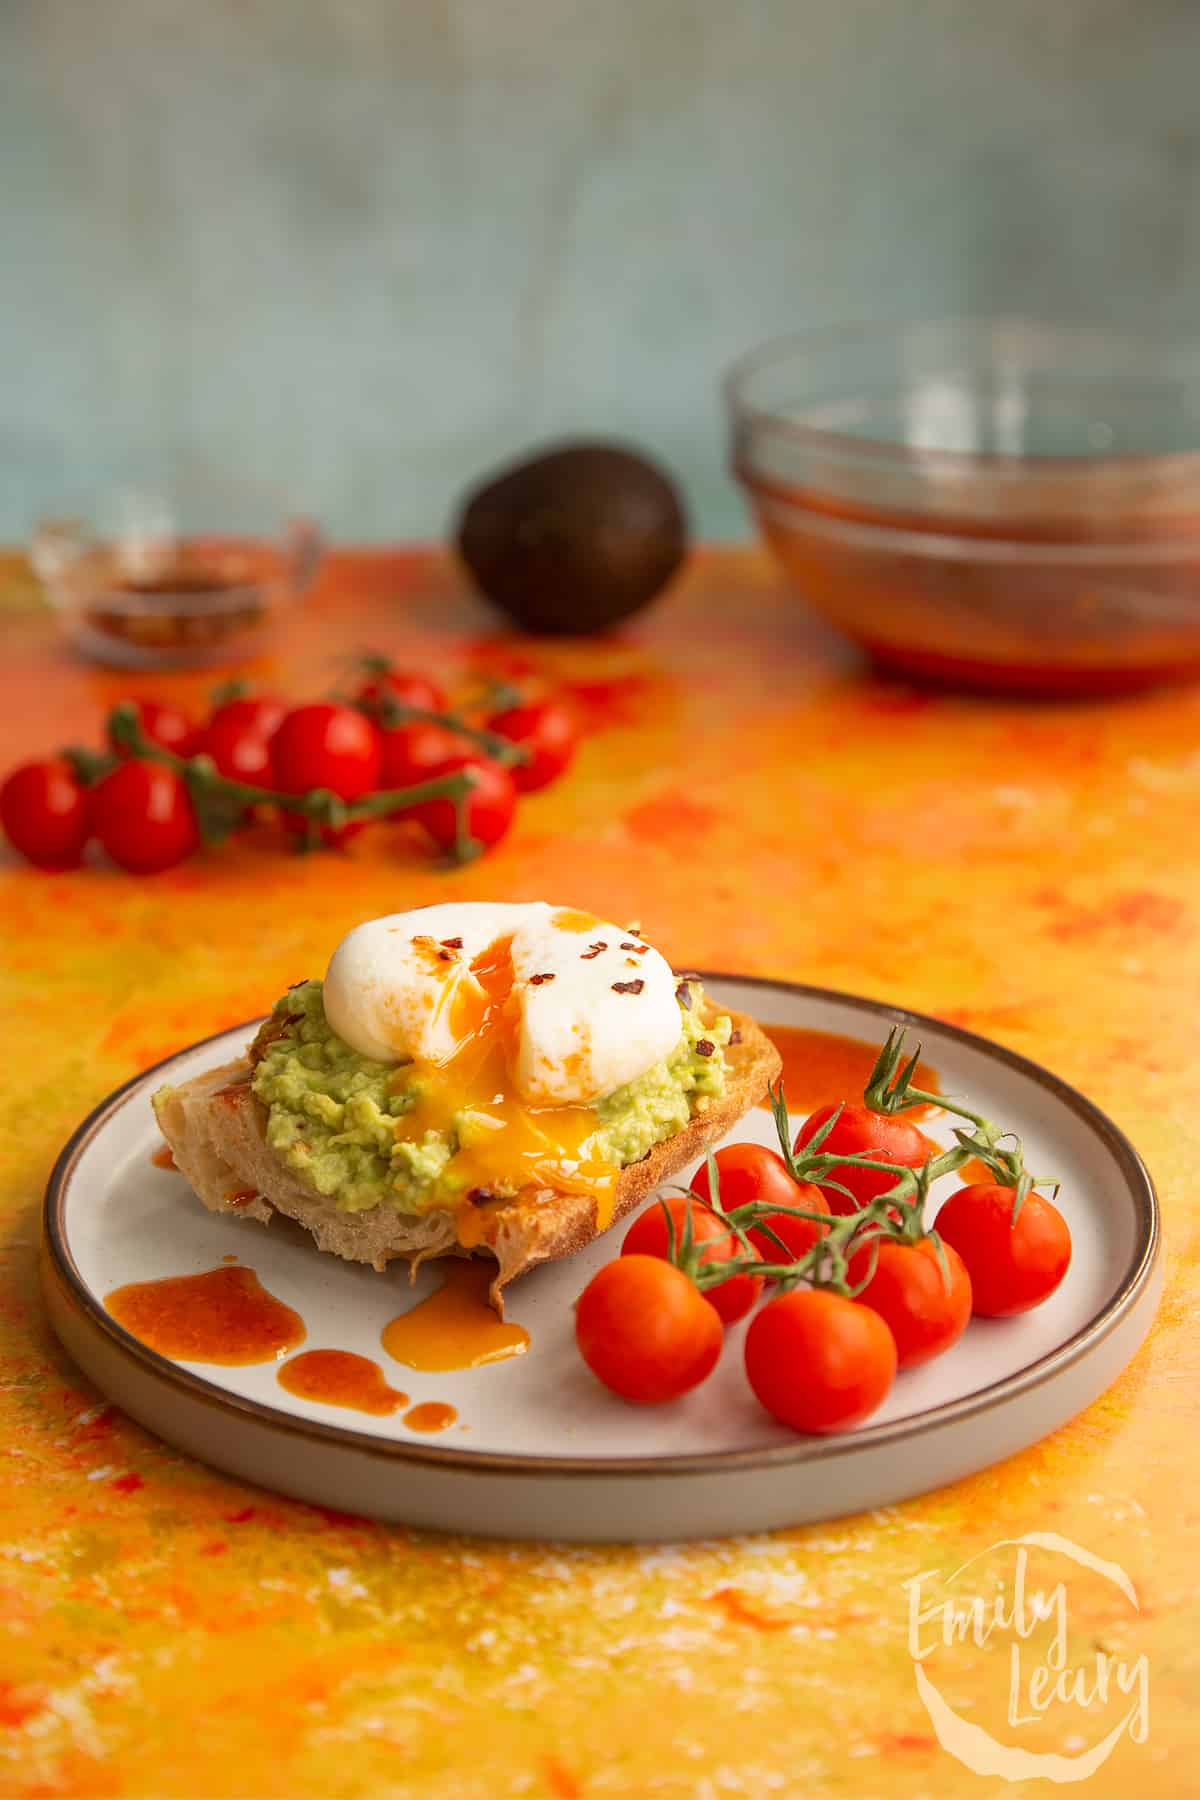 Avocado and poached egg with homemade chipotle dressing.